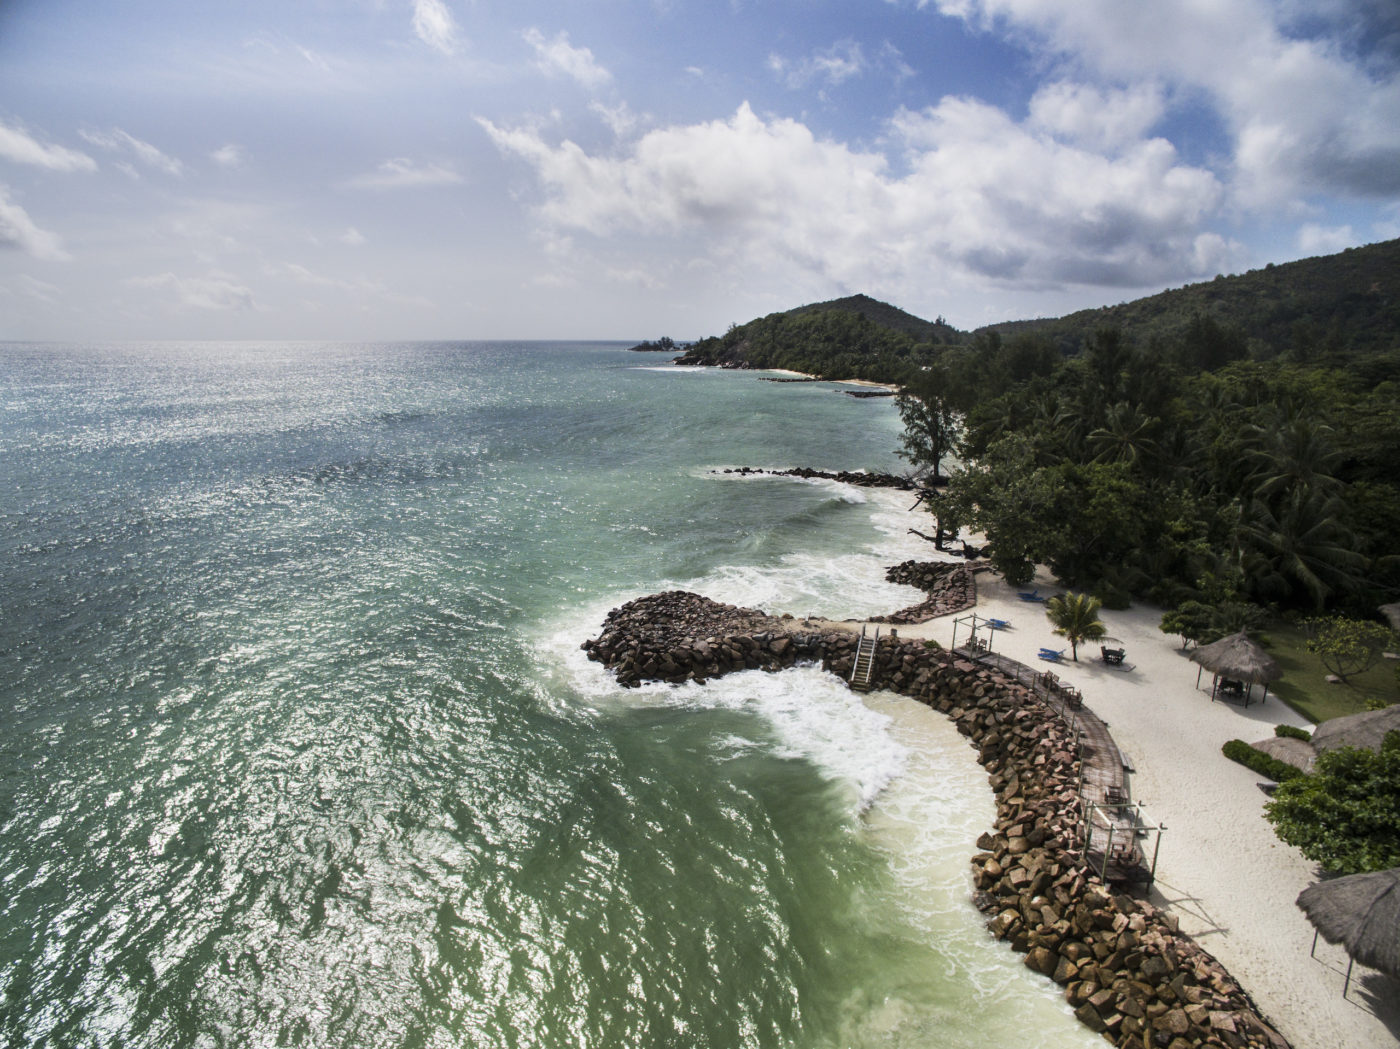 <p>Coastal protection in the Seychelles, one of the countries most vulnerable to the effects of climate change (Image: Kadir van Lohuizen / NOOR via Flickr, CC BY-NC-SA 2.0)</p>